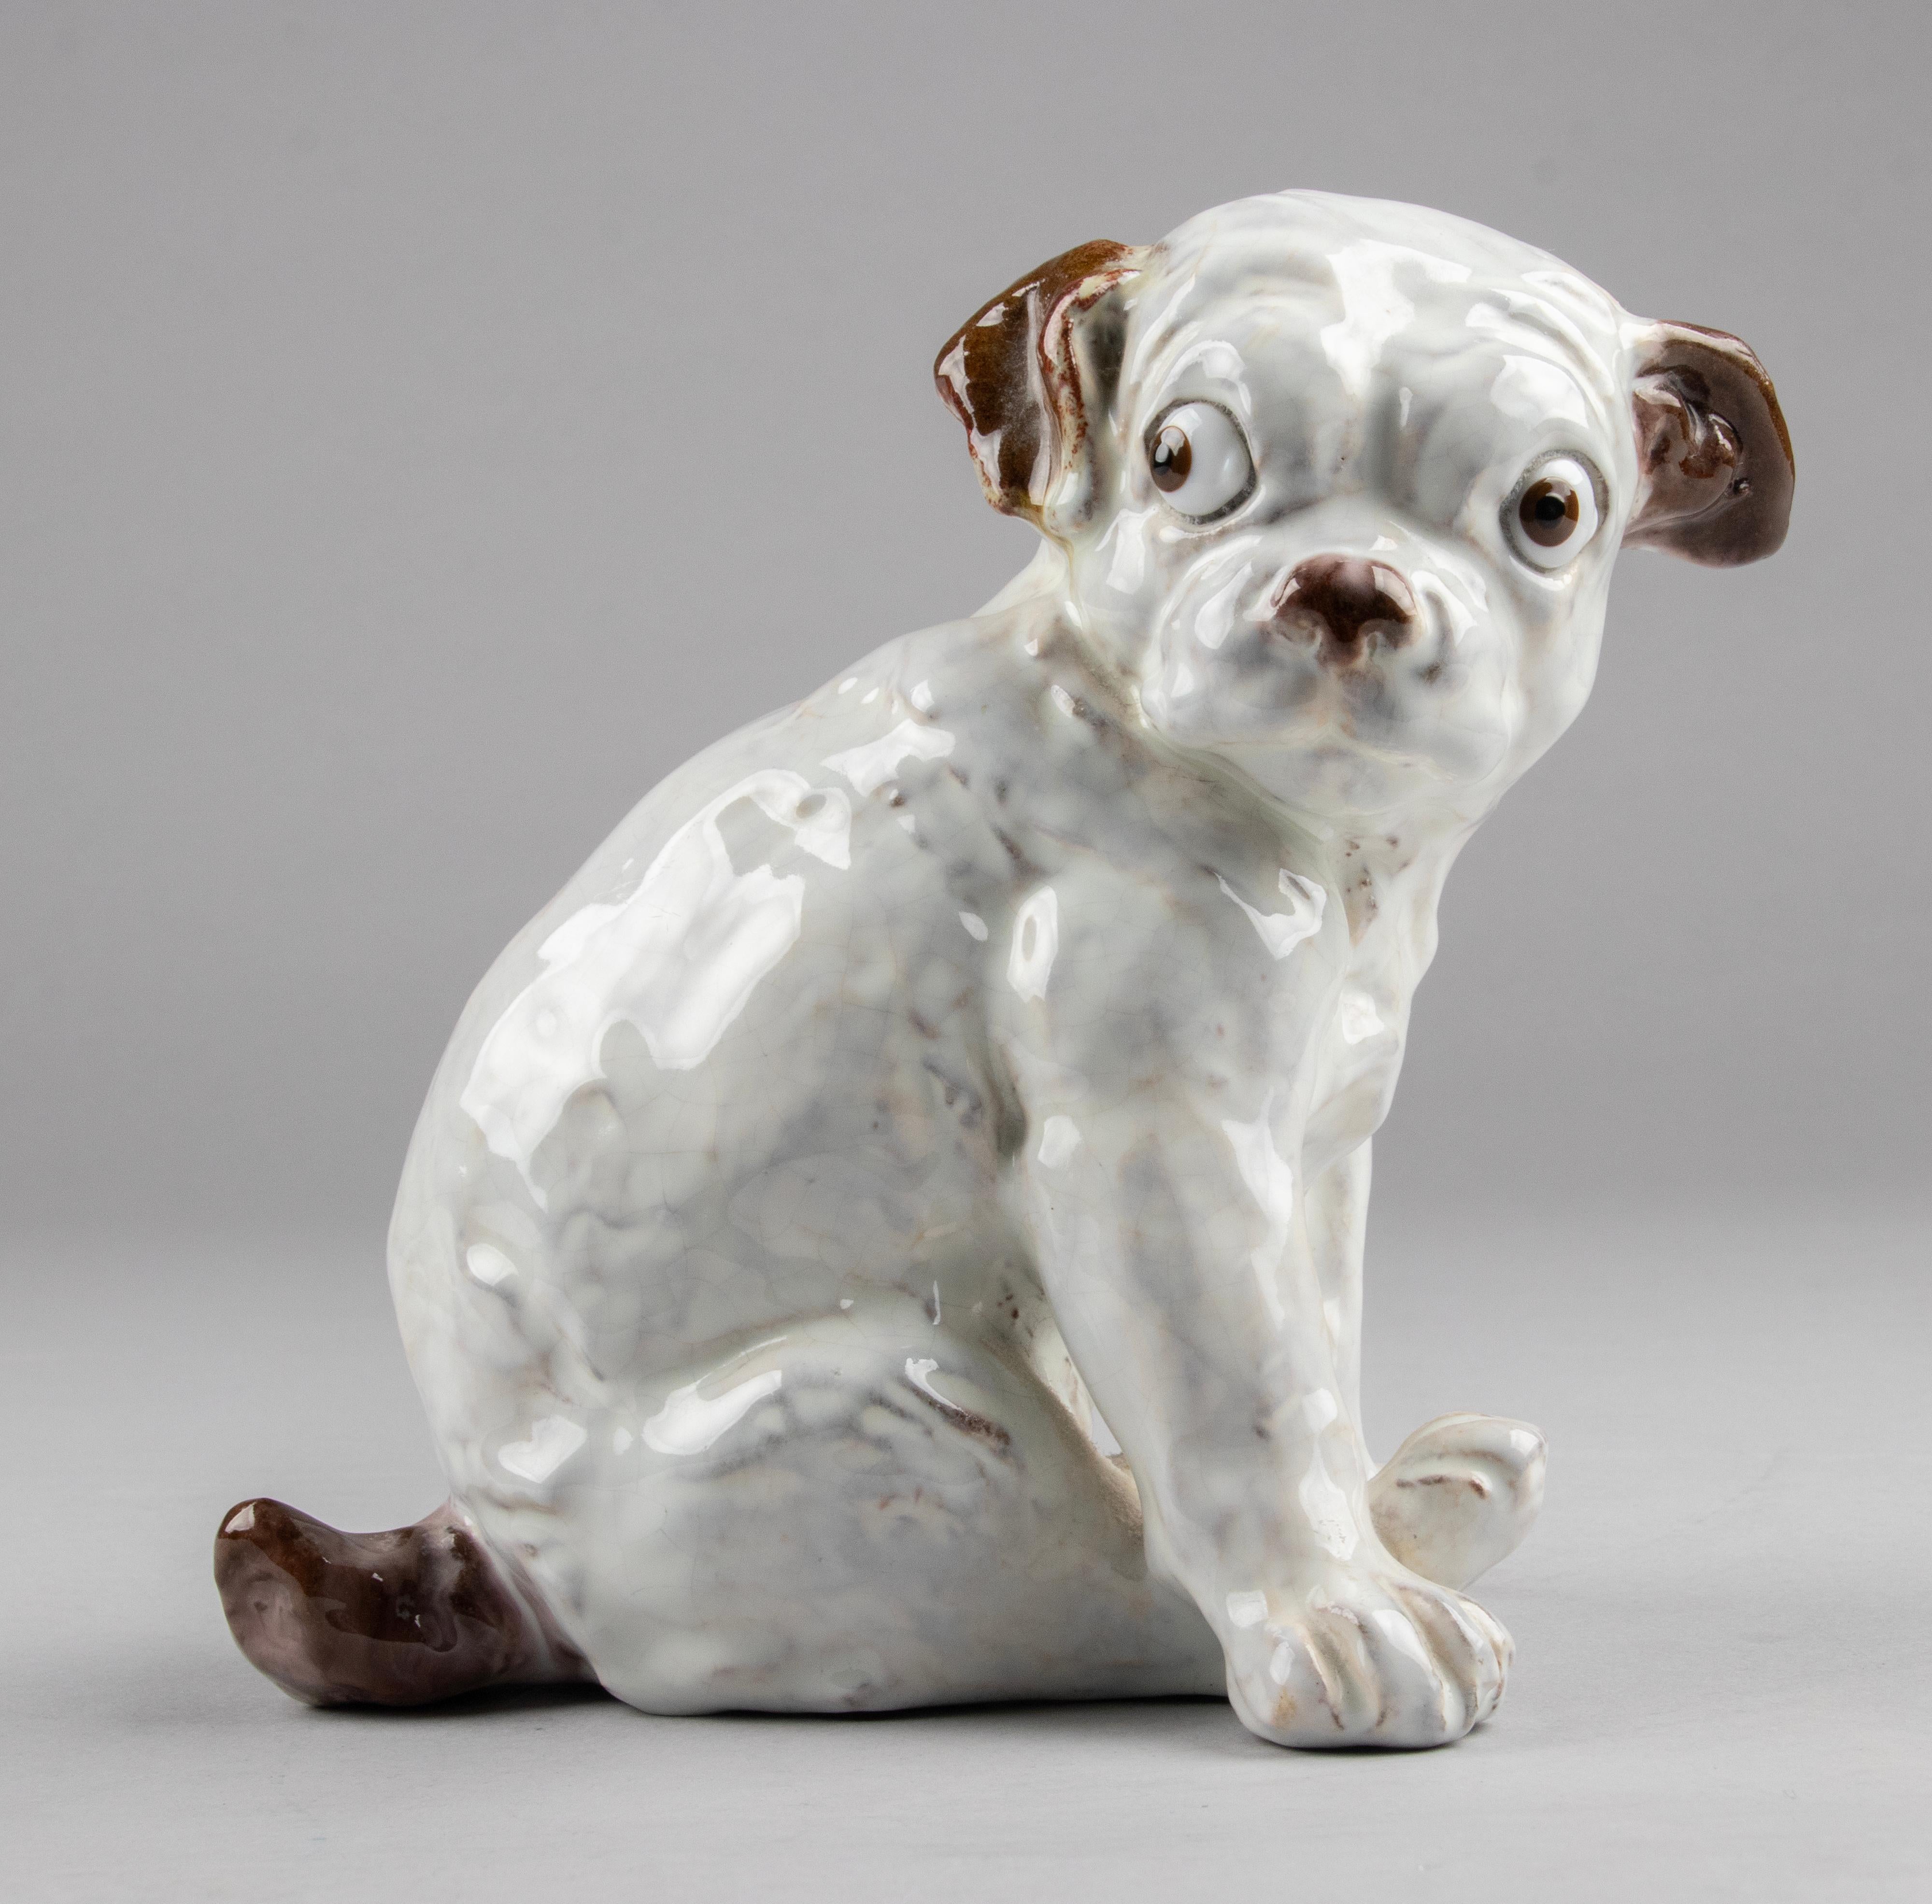 Molded 19th Century Ceramic Sculpture of a Pug Dog by J. Filmont Caen, France